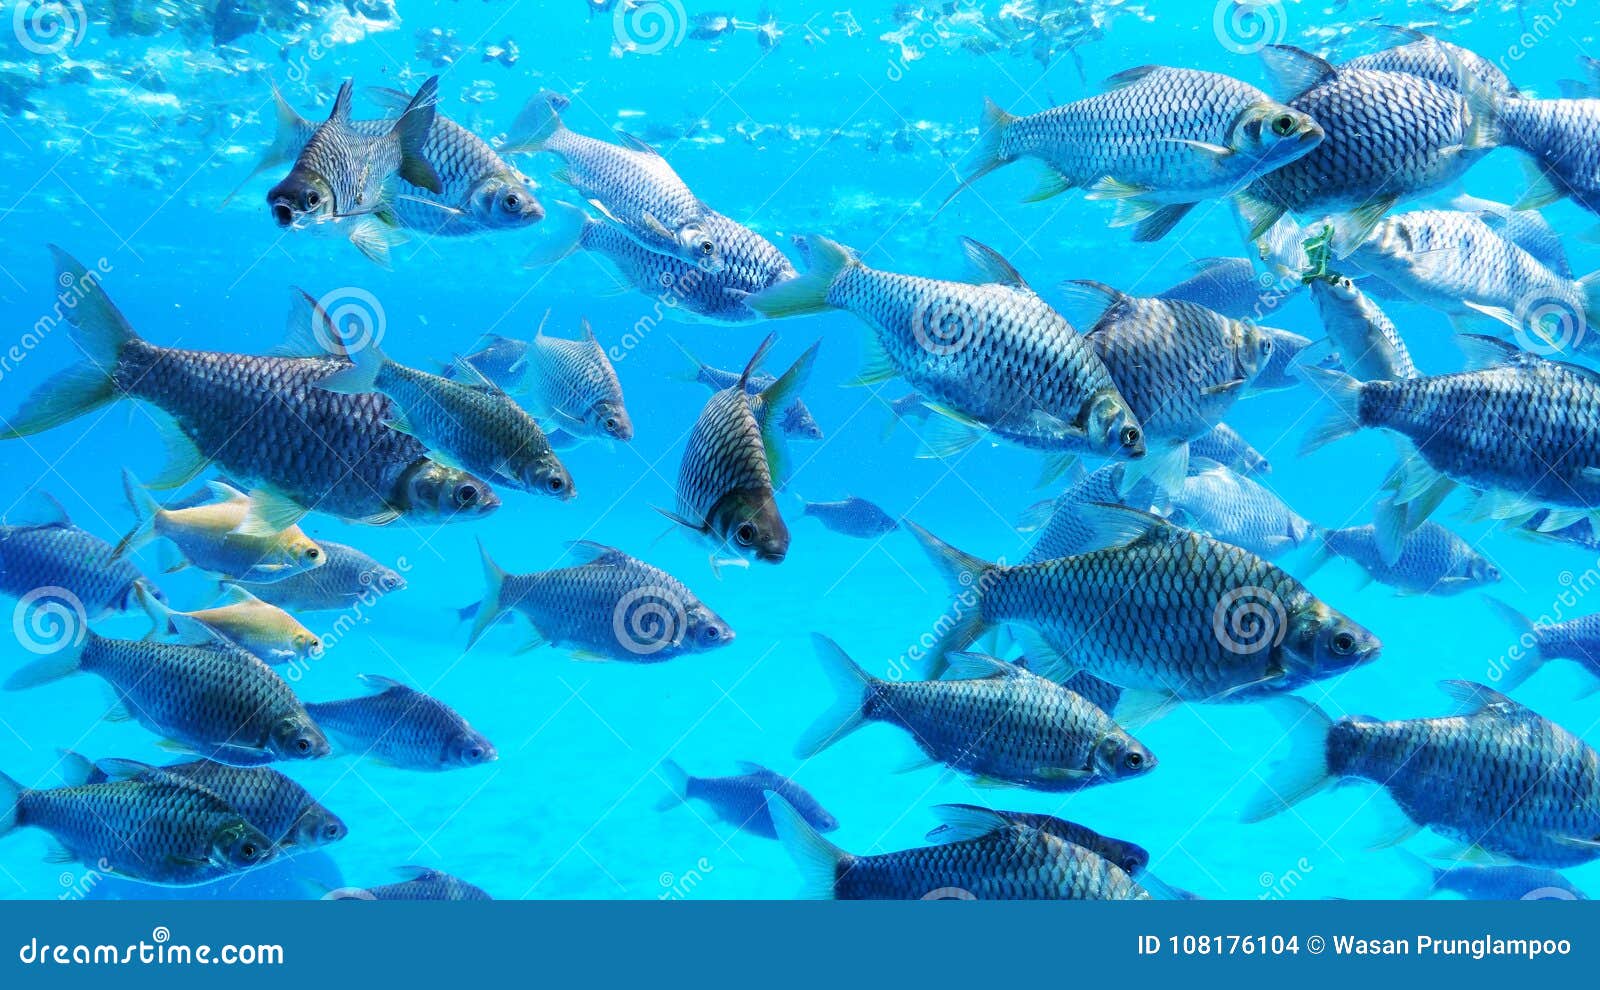 https://thumbs.dreamstime.com/z/group-silver-barb-fish-water-group-silver-barb-fish-108176104.jpg